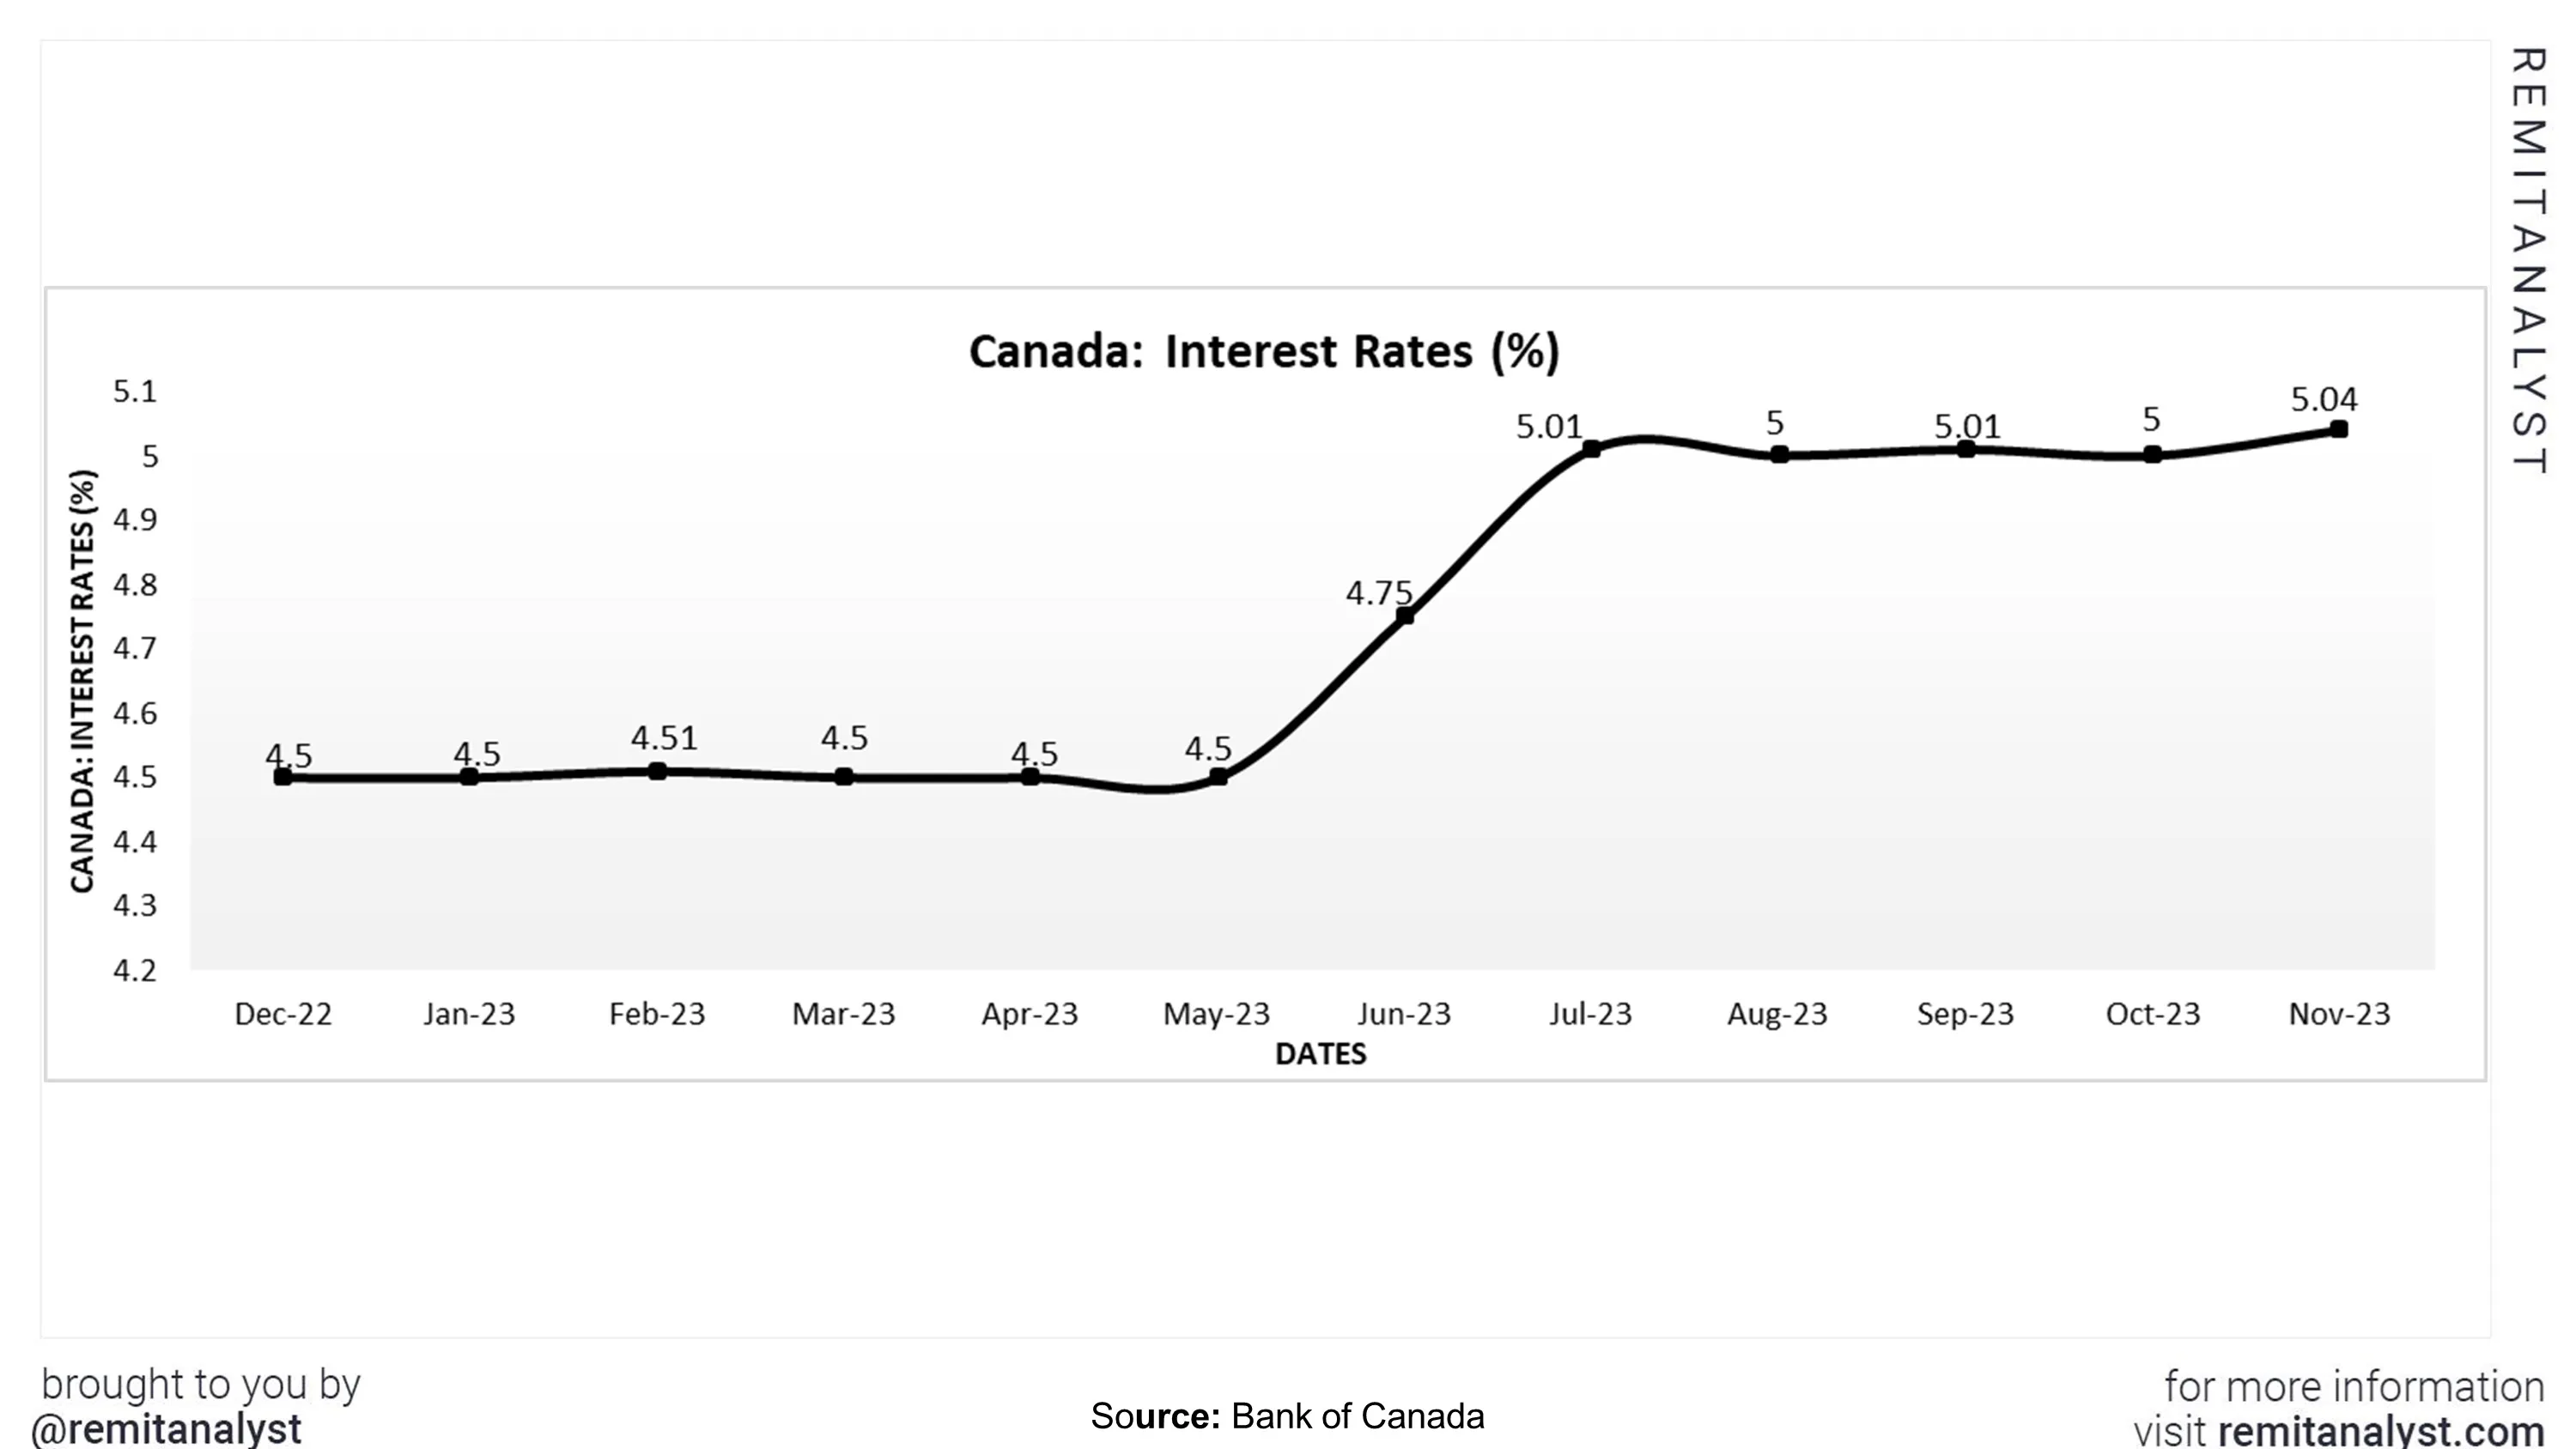 interest-rates-canada-from-dec-2022-to-nov-2023